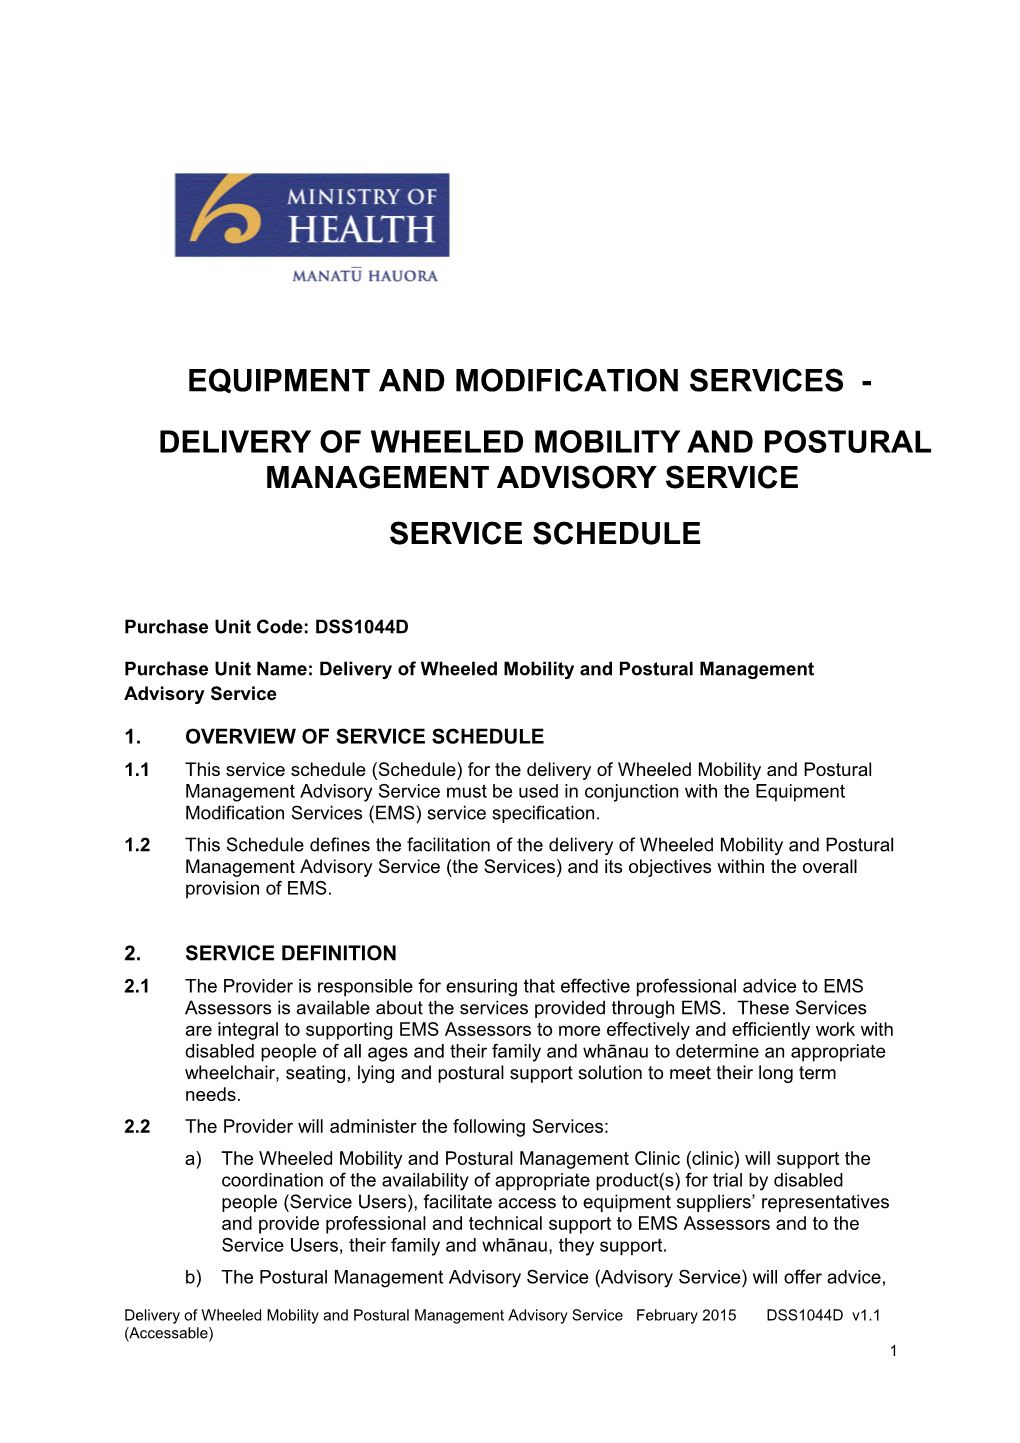 Delivery of WHEELED MOBILITY and POSTURAL MANAGEMENT Advisory Service